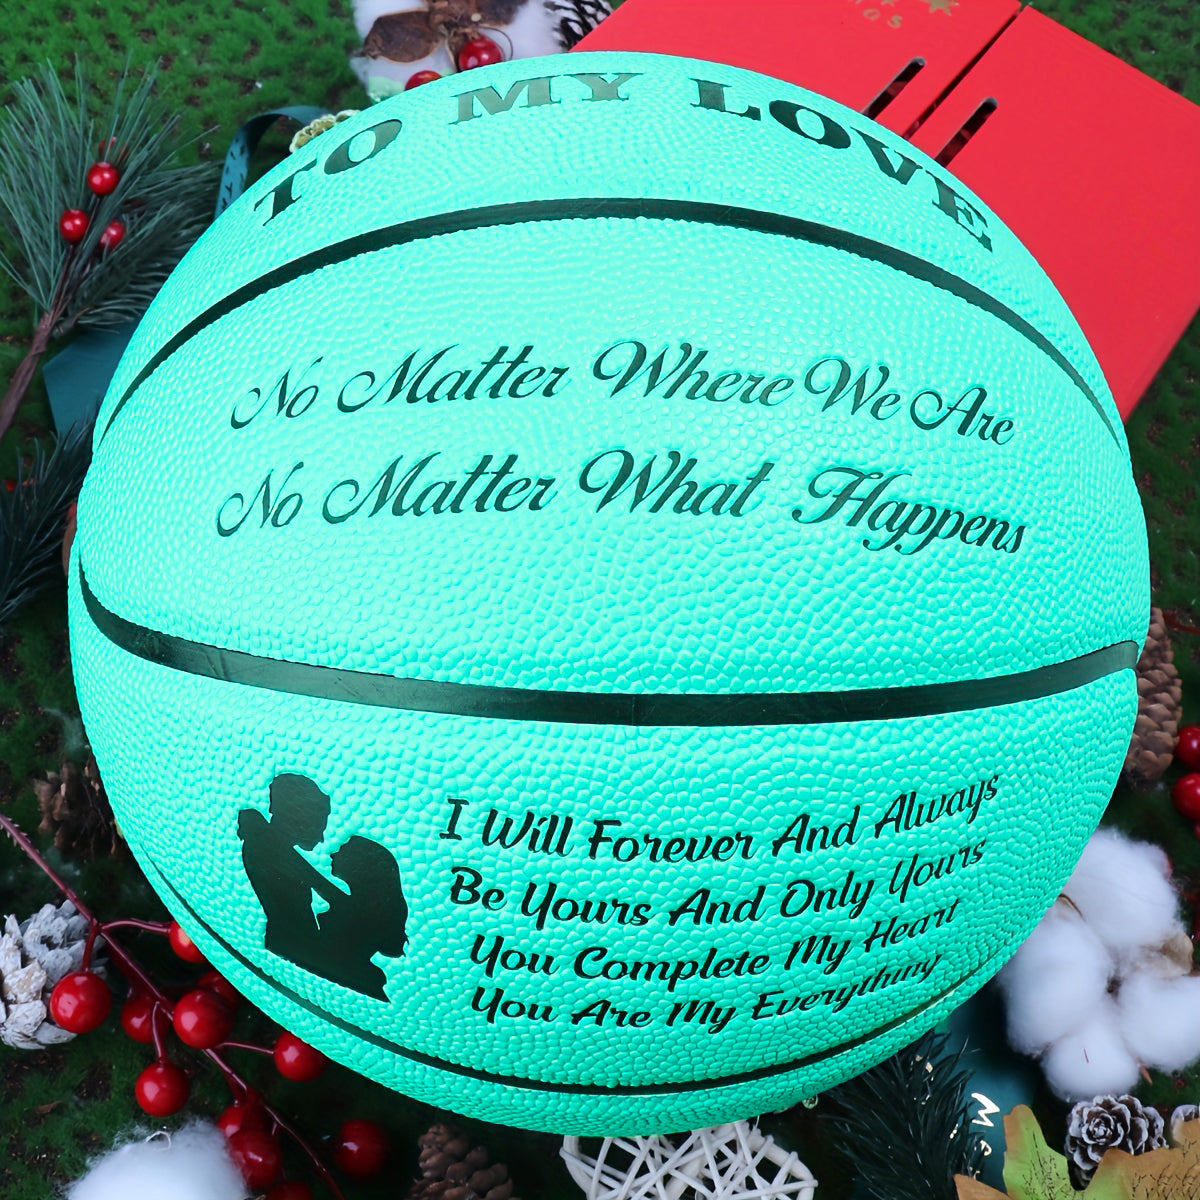 Personalized Letter Basketball For Love, Basketball Indoor/Outdoor Game Ball For Love, Birthday Christmas Gift For Her&him, Blue